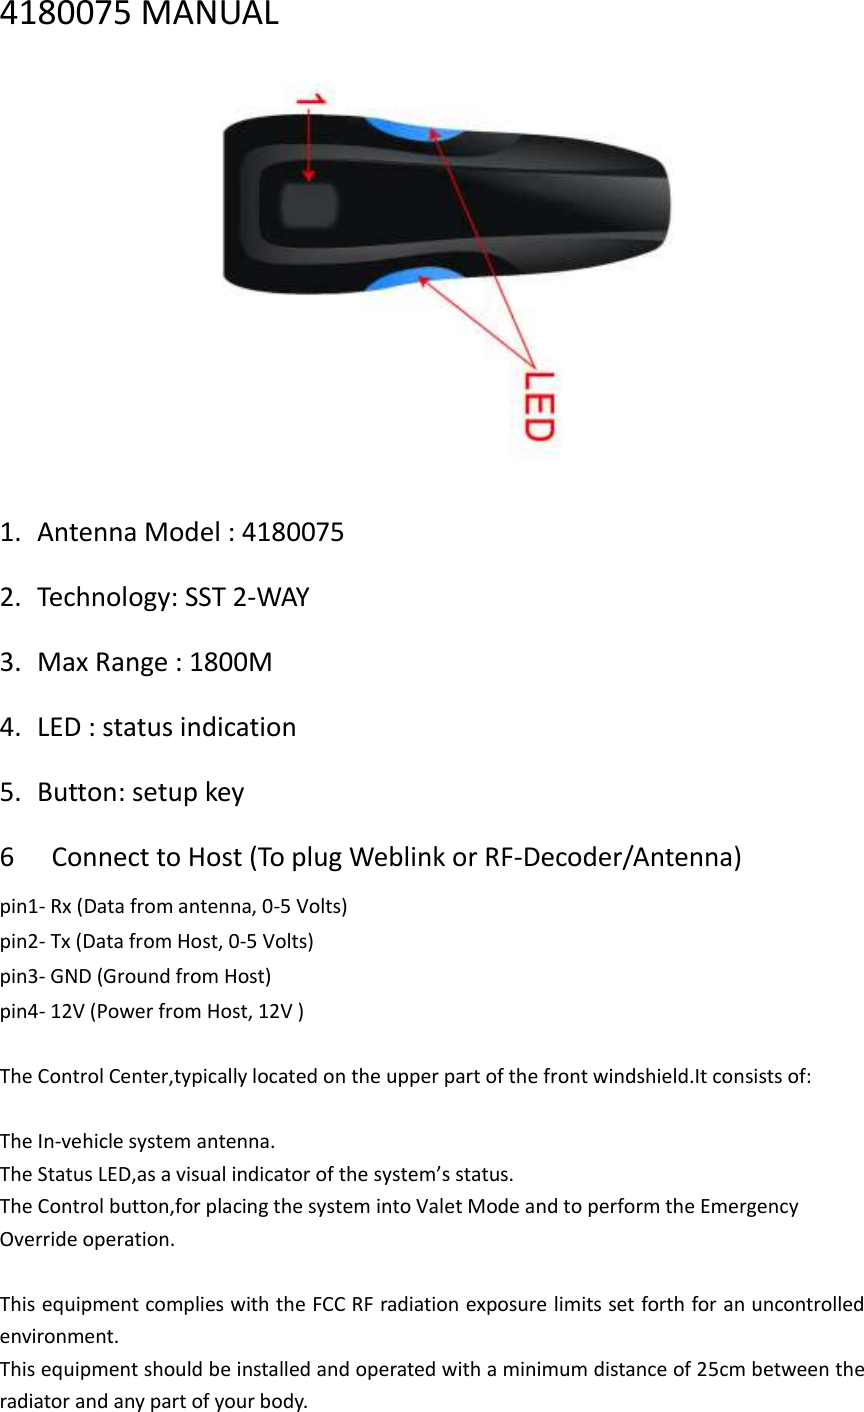 4180075 MANUAL  1. Antenna Model : 4180075 2. Technology: SST 2-WAY 3. Max Range : 1800M 4. LED : status indication 5. Button: setup key 6   Connect to Host (To plug Weblink or RF-Decoder/Antenna)   pin1- Rx (Data from antenna, 0-5 Volts)   pin2- Tx (Data from Host, 0-5 Volts)   pin3- GND (Ground from Host)   pin4- 12V (Power from Host, 12V )    The Control Center,typically located on the upper part of the front windshield.It consists of:  The In-vehicle system antenna. The Status LED,as a visual indicator of the system’s status. The Control button,for placing the system into Valet Mode and to perform the Emergency Override operation.  This equipment complies with the FCC RF radiation exposure limits set forth for an uncontrolled environment.   This equipment should be installed and operated with a minimum distance of 25cm between the radiator and any part of your body. 